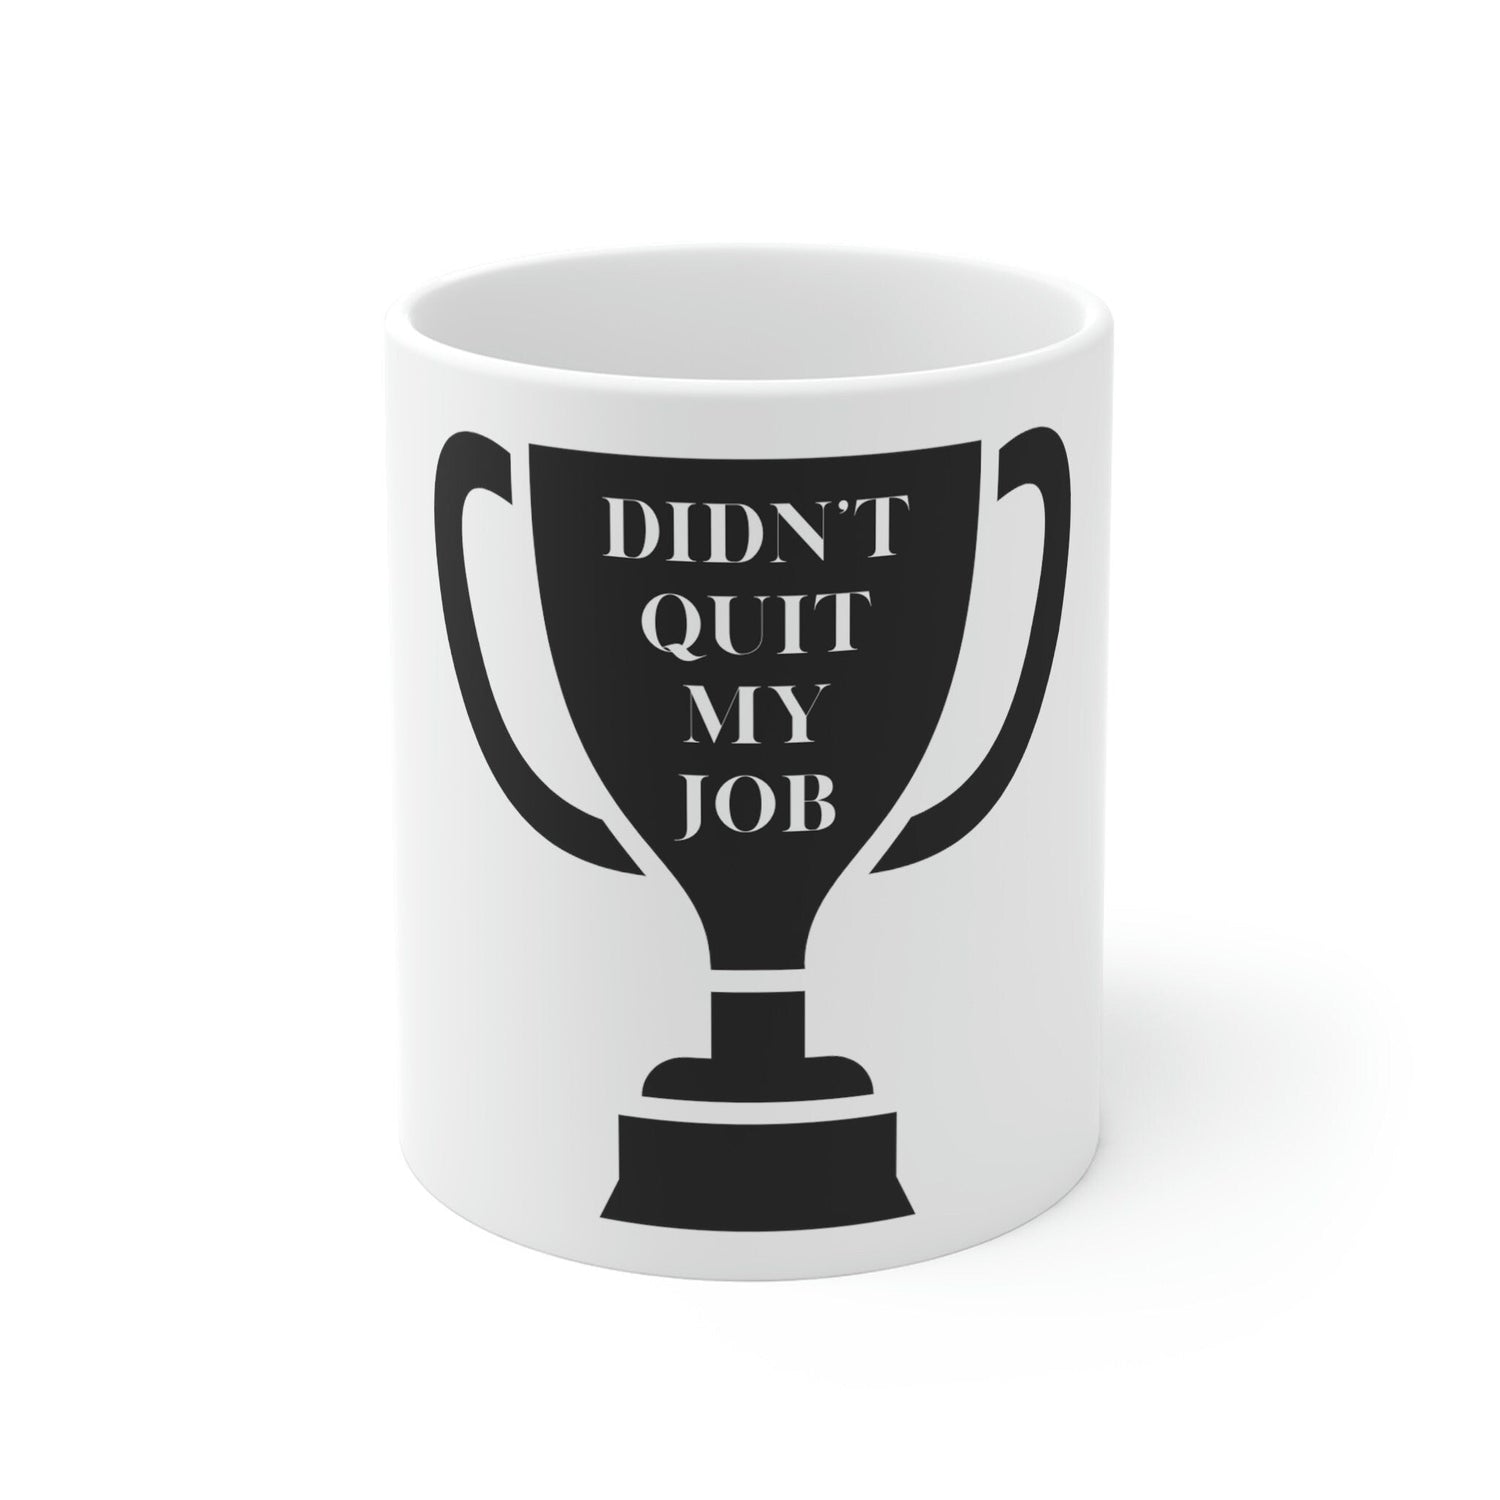 https://gatheringlittles.com/cdn/shop/products/gifts-for-new-moms-coffee-mug-funny-new-mom-gift-coffee-mugs-for-new-moms-didnt-quit-my-job-muggifts-for-new-moms-820256.jpg?v=1691073363&width=1500